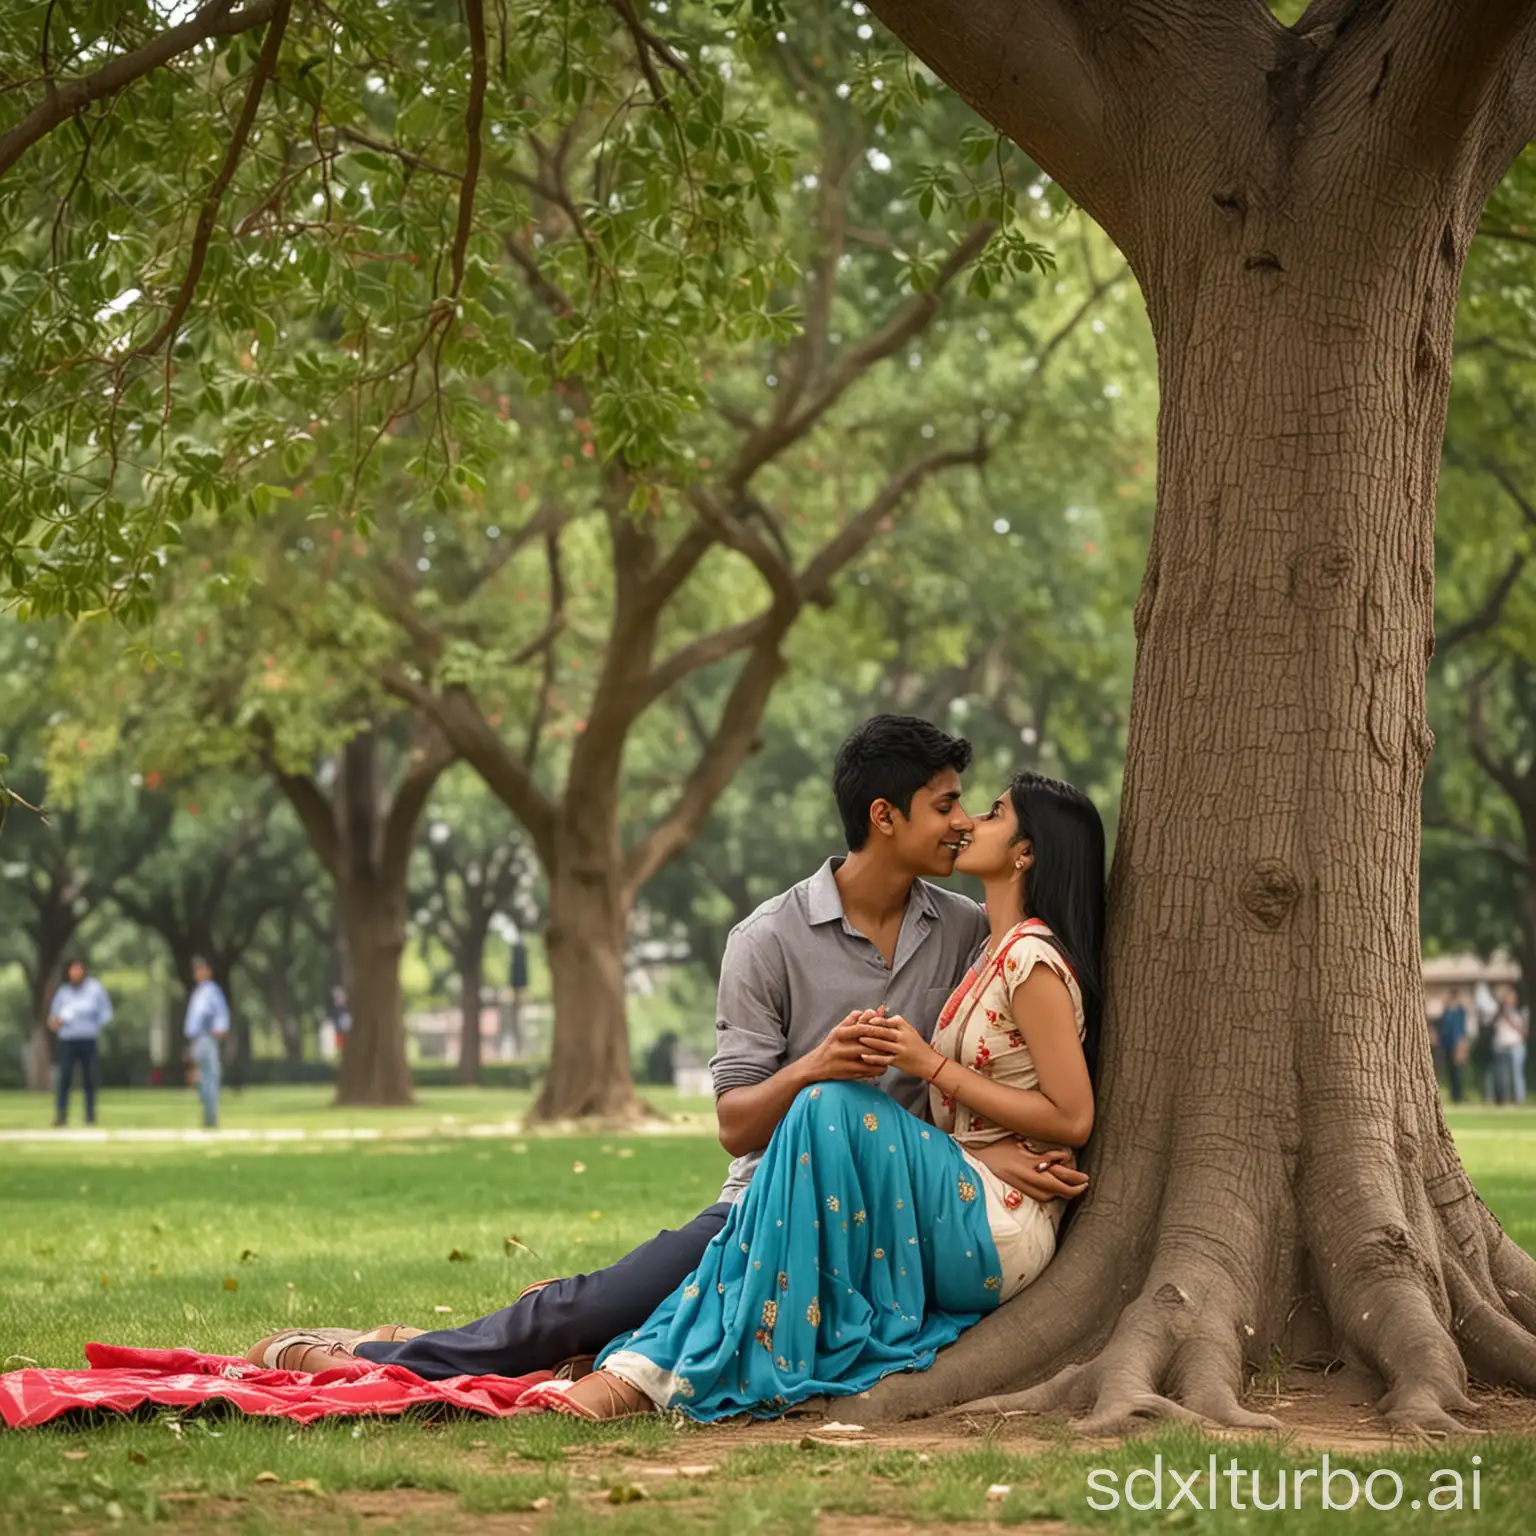 Romantic-Indian-College-Couple-Enjoying-Intimate-Moment-under-Tree-on-Campus